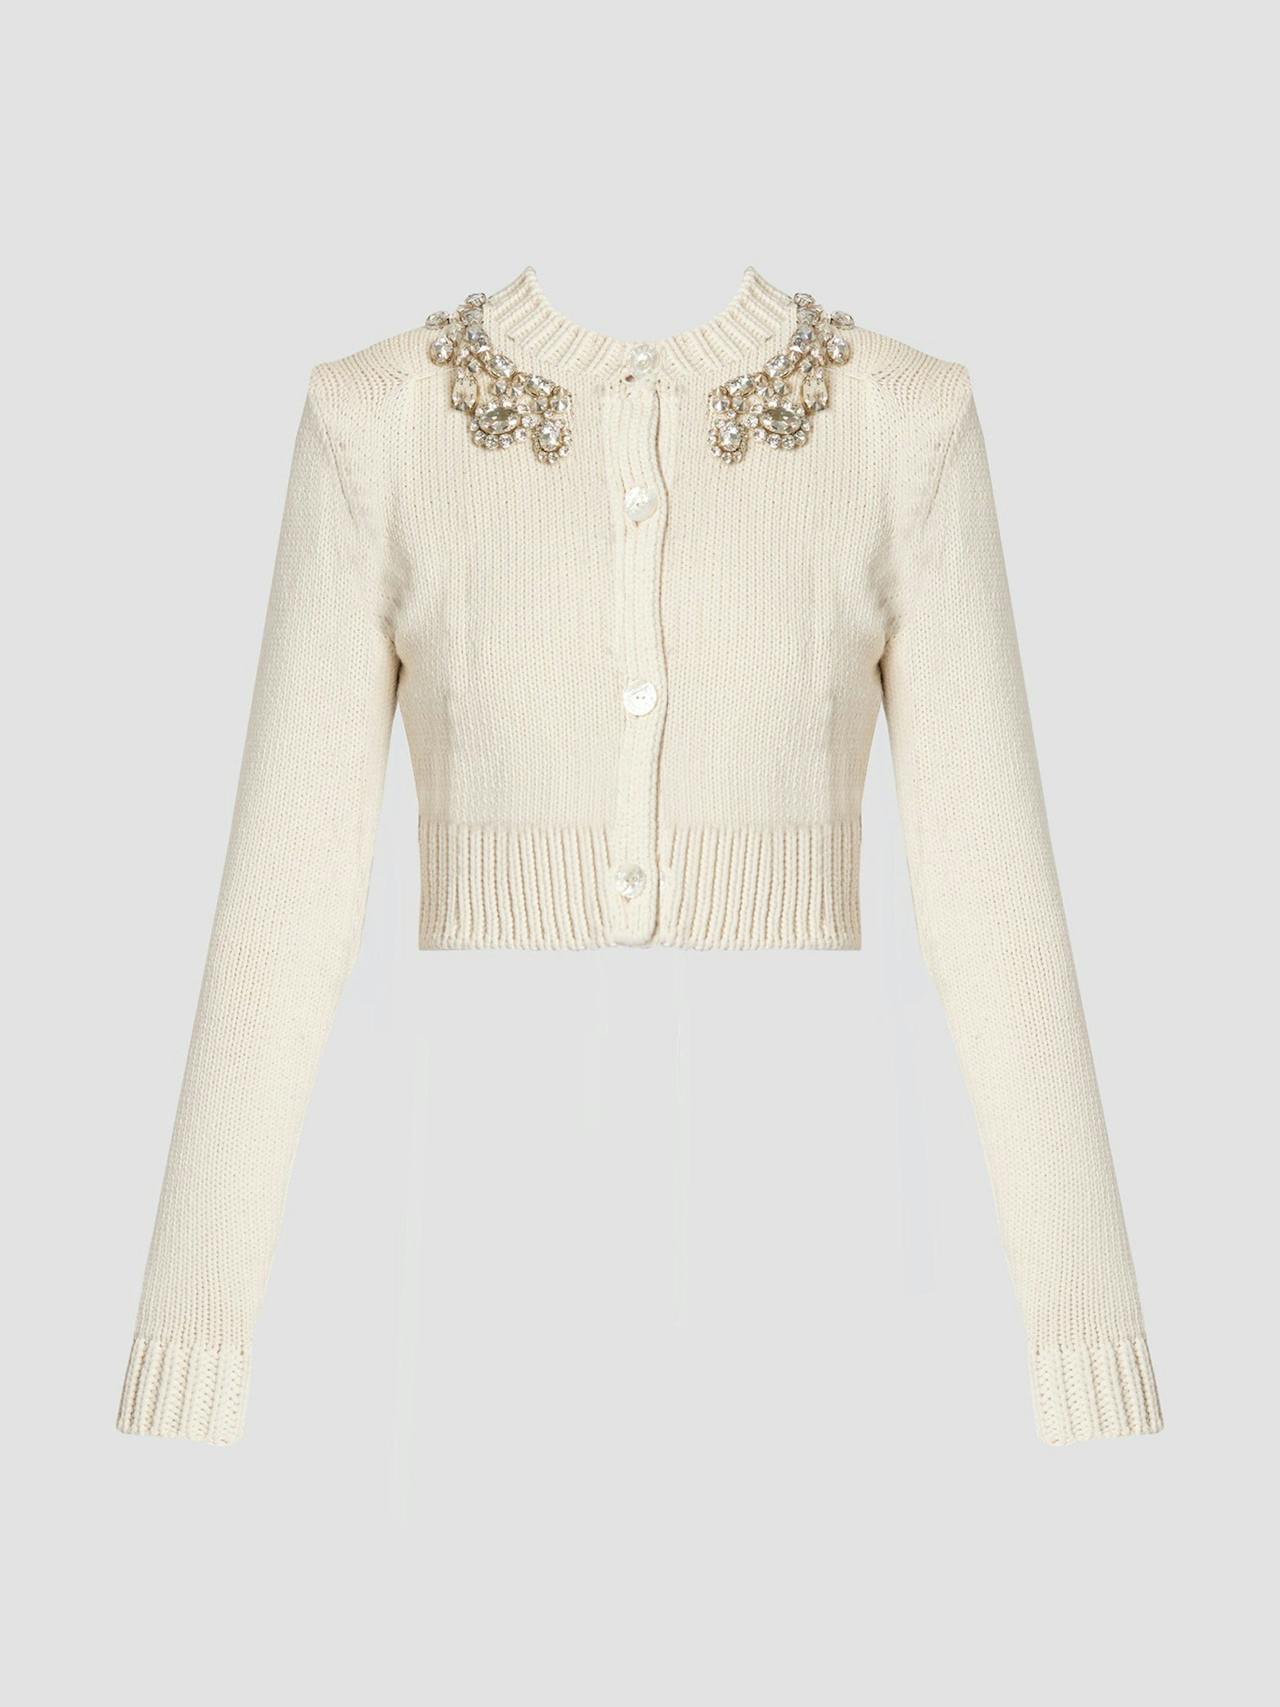 Calico embroidered cotton knit cropped cardigan